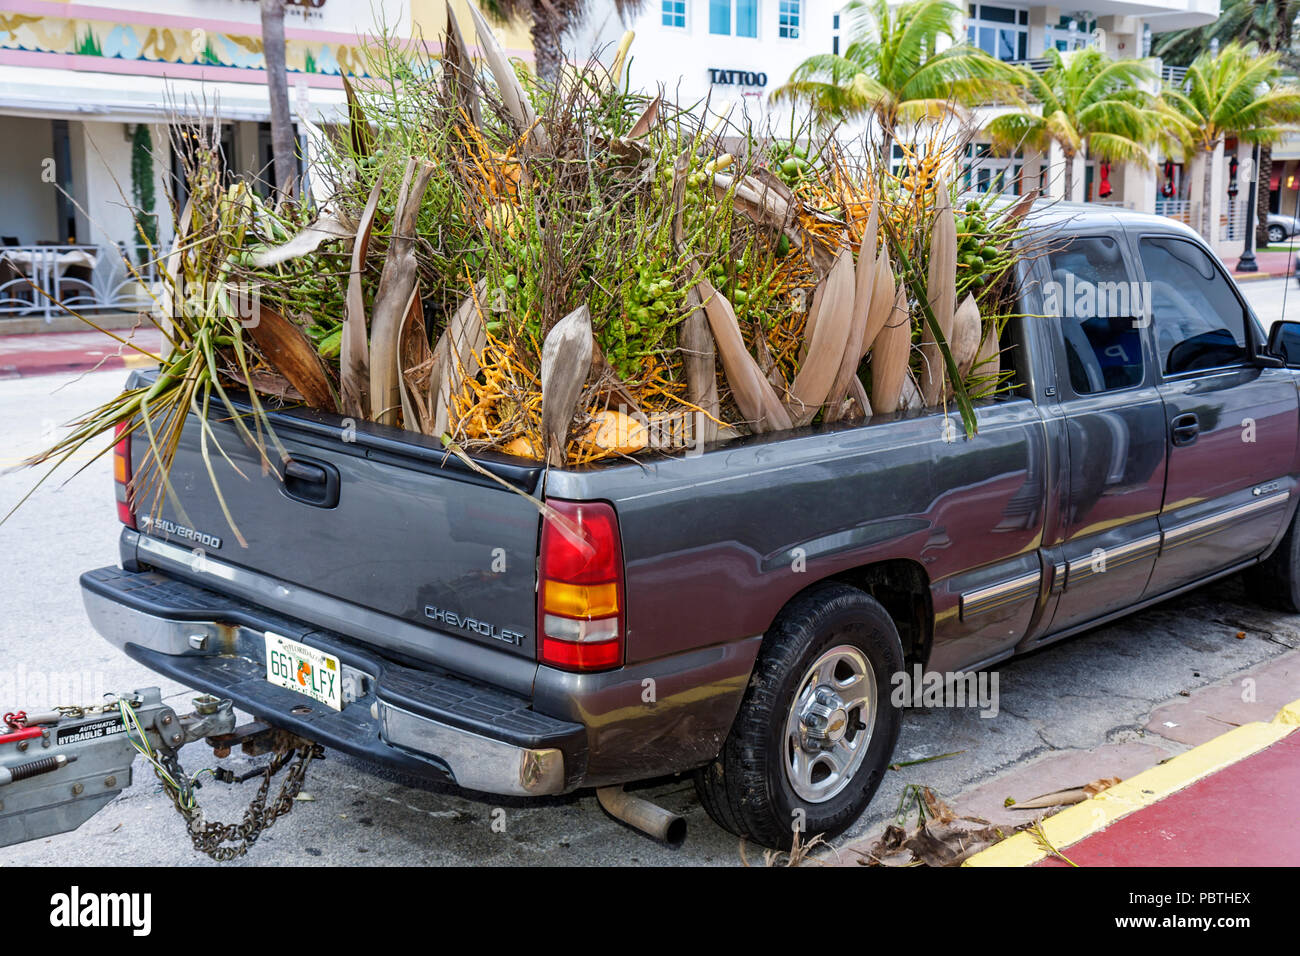 Miami Beach Florida,Ocean Drive,Chevrolet,pickup truck,lorry,rear cargo,coconut palm leaves,pods,coconuts,plant debris,full load,trash,pruning,FL08093 Stock Photo